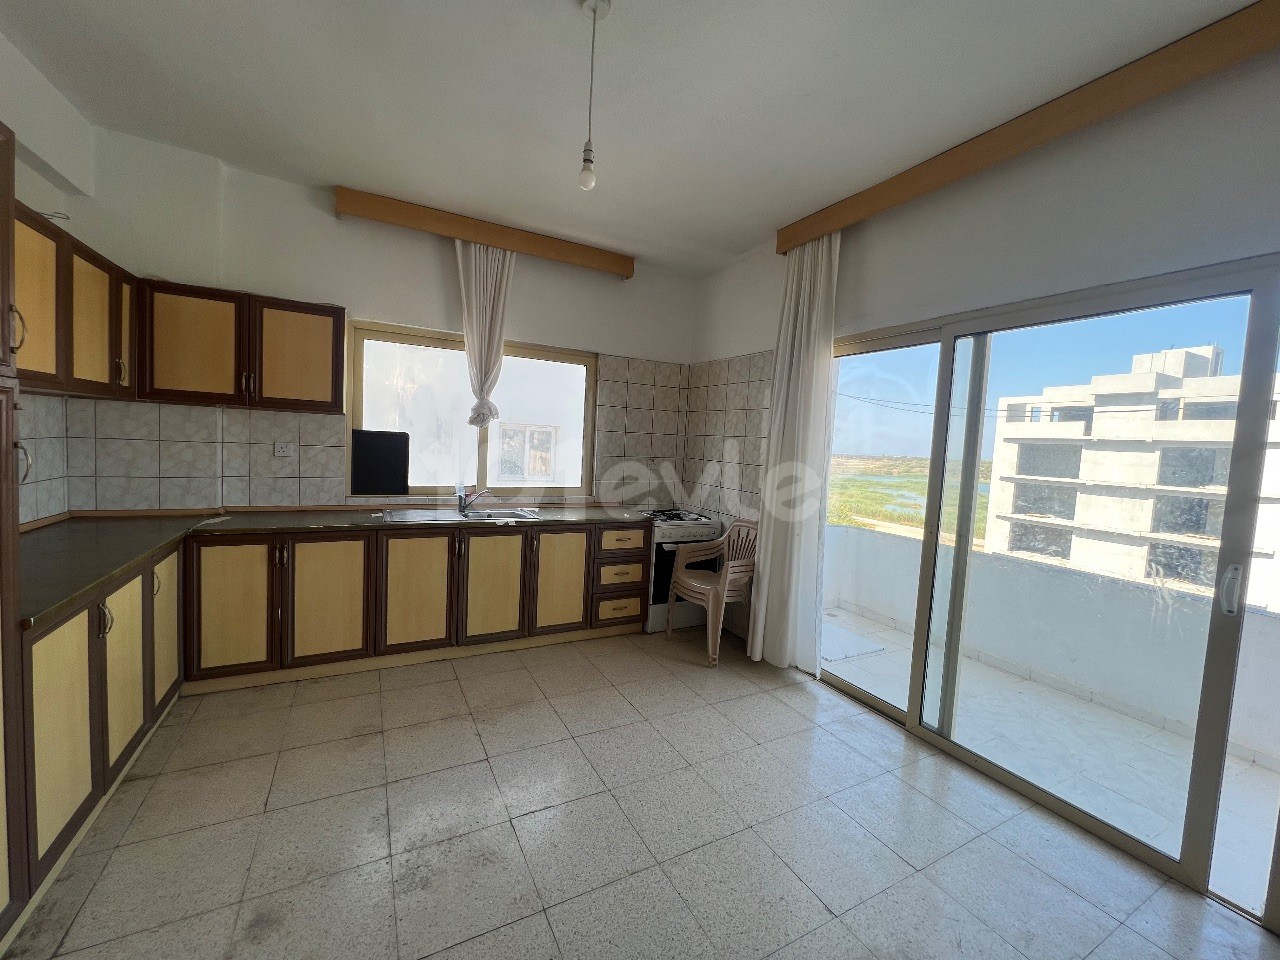 3+1 FLAT WITH ANNUAL PAYMENT ON SALAMIS STREET, 3 MINUTES WALKING DISTANCE TO EMU!